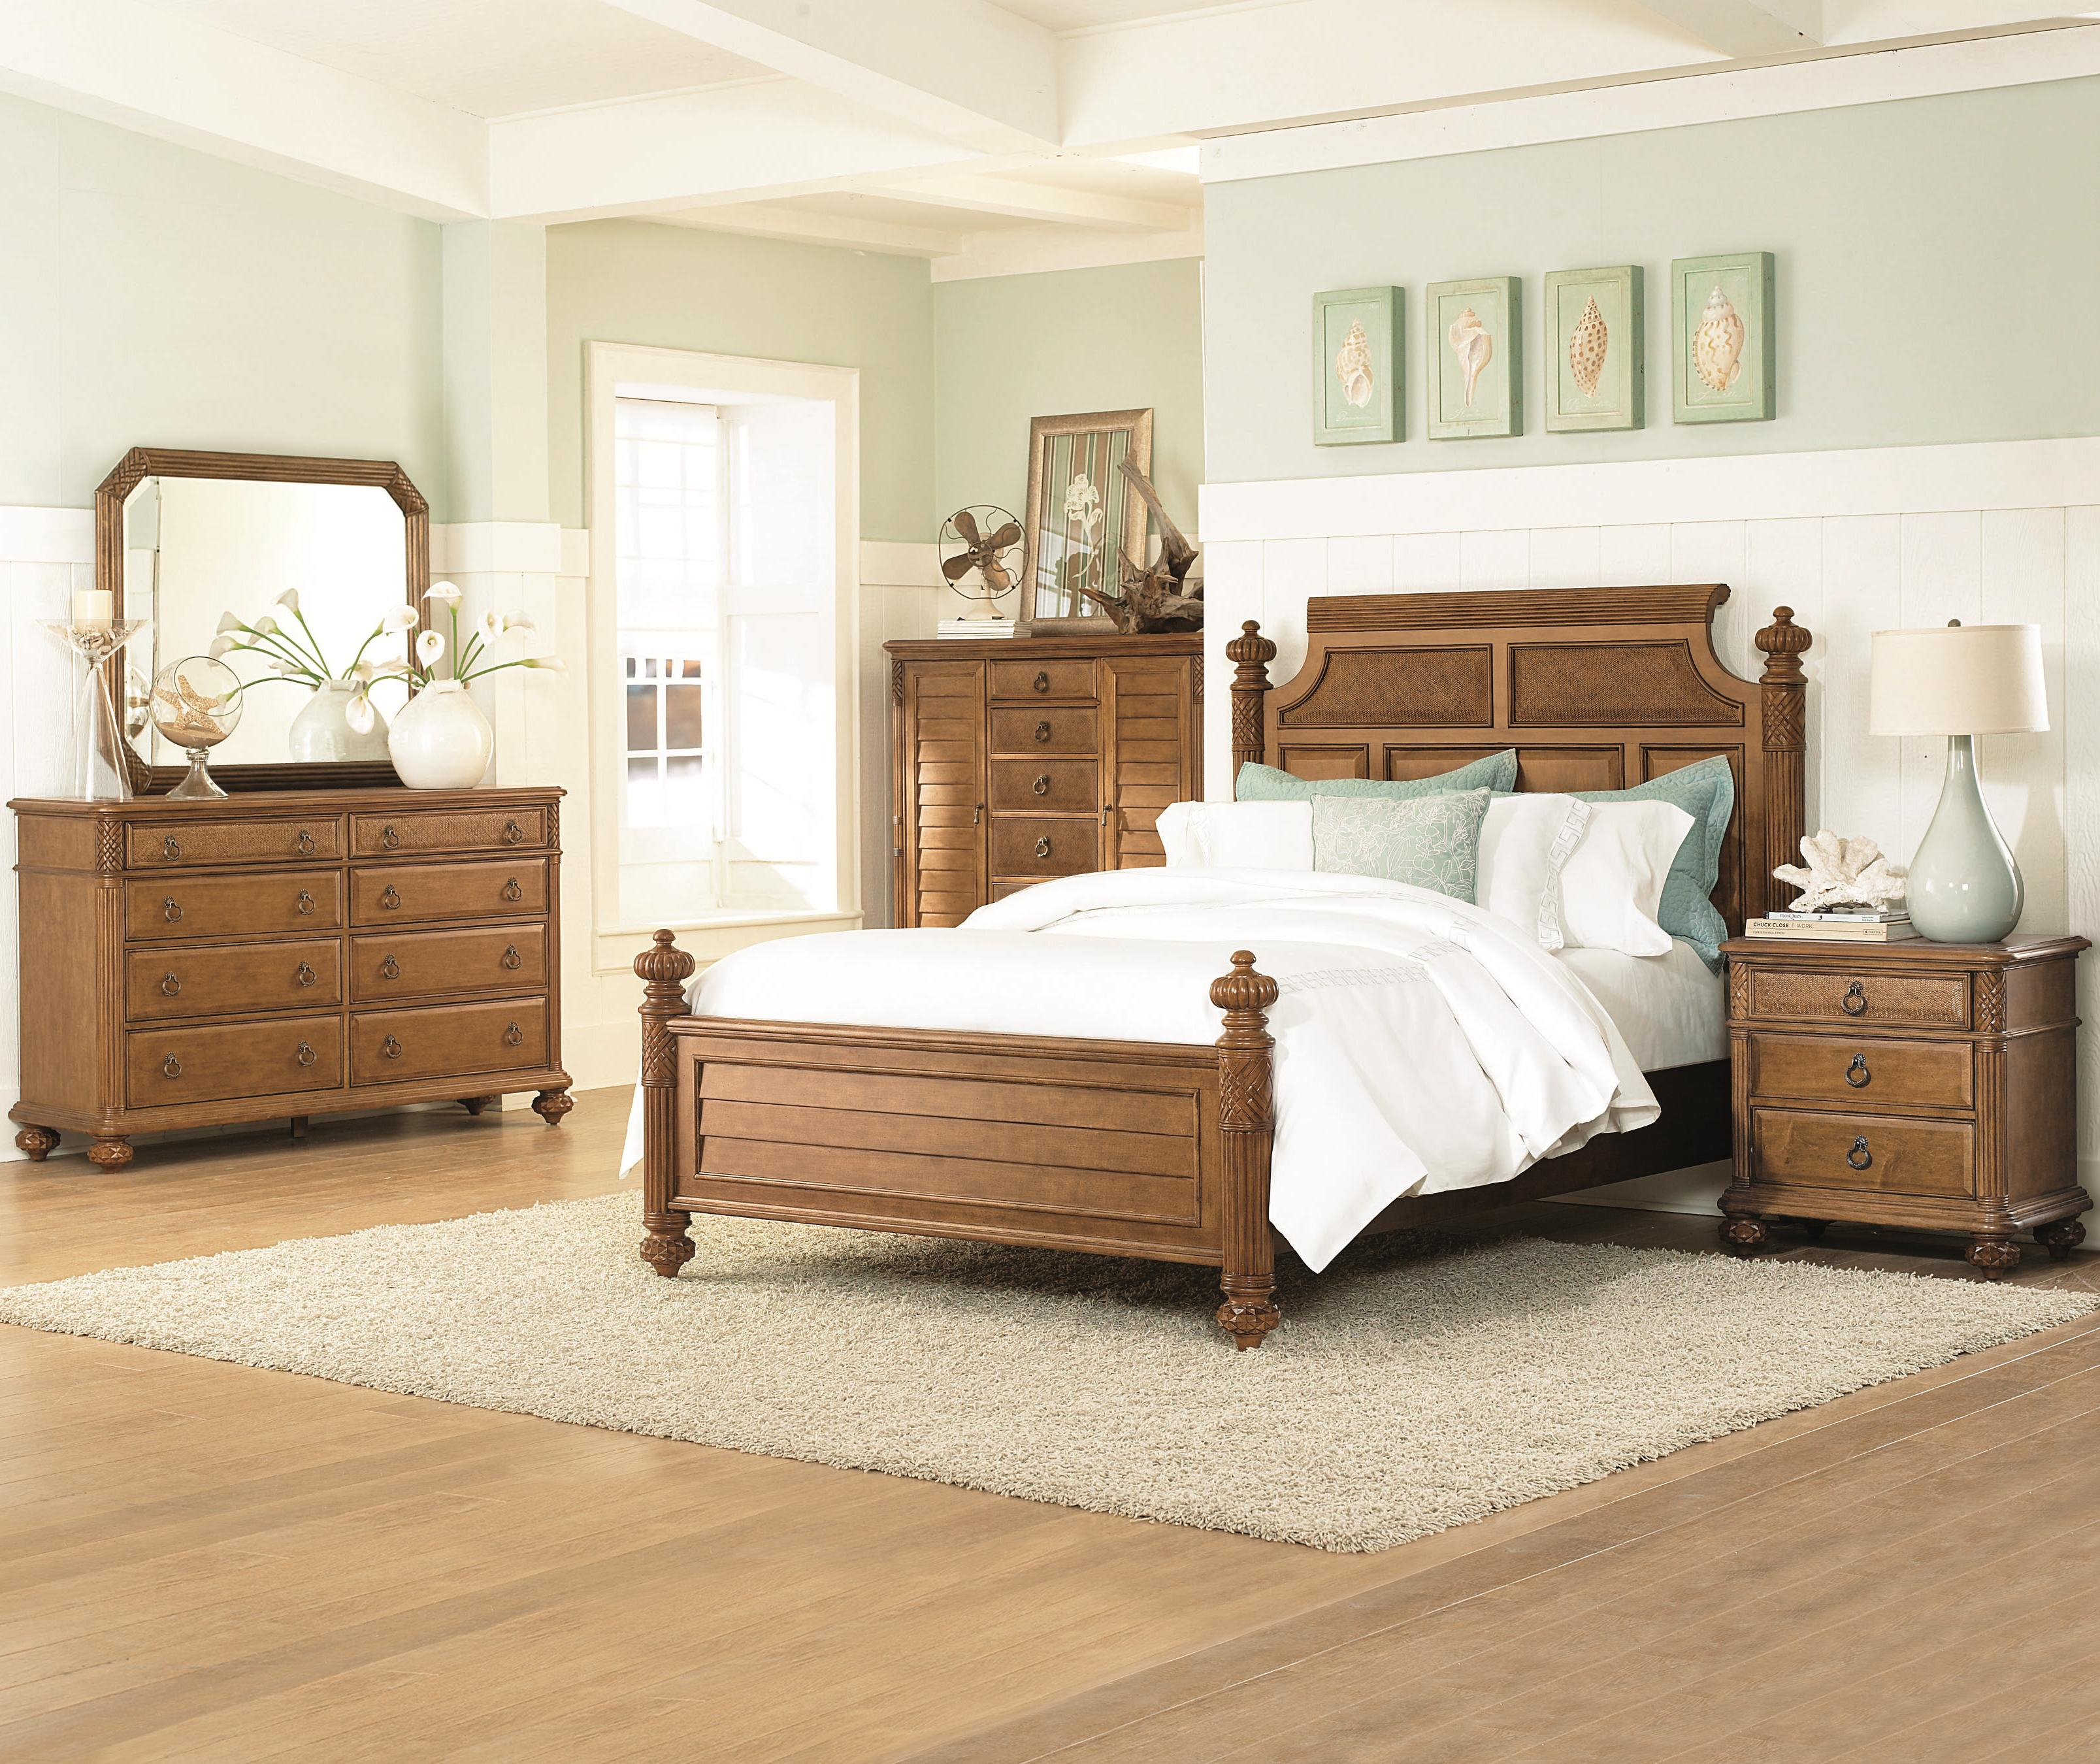 Island Bedroom Furniture Wvsdc Throughout Size 3214 X 2700 